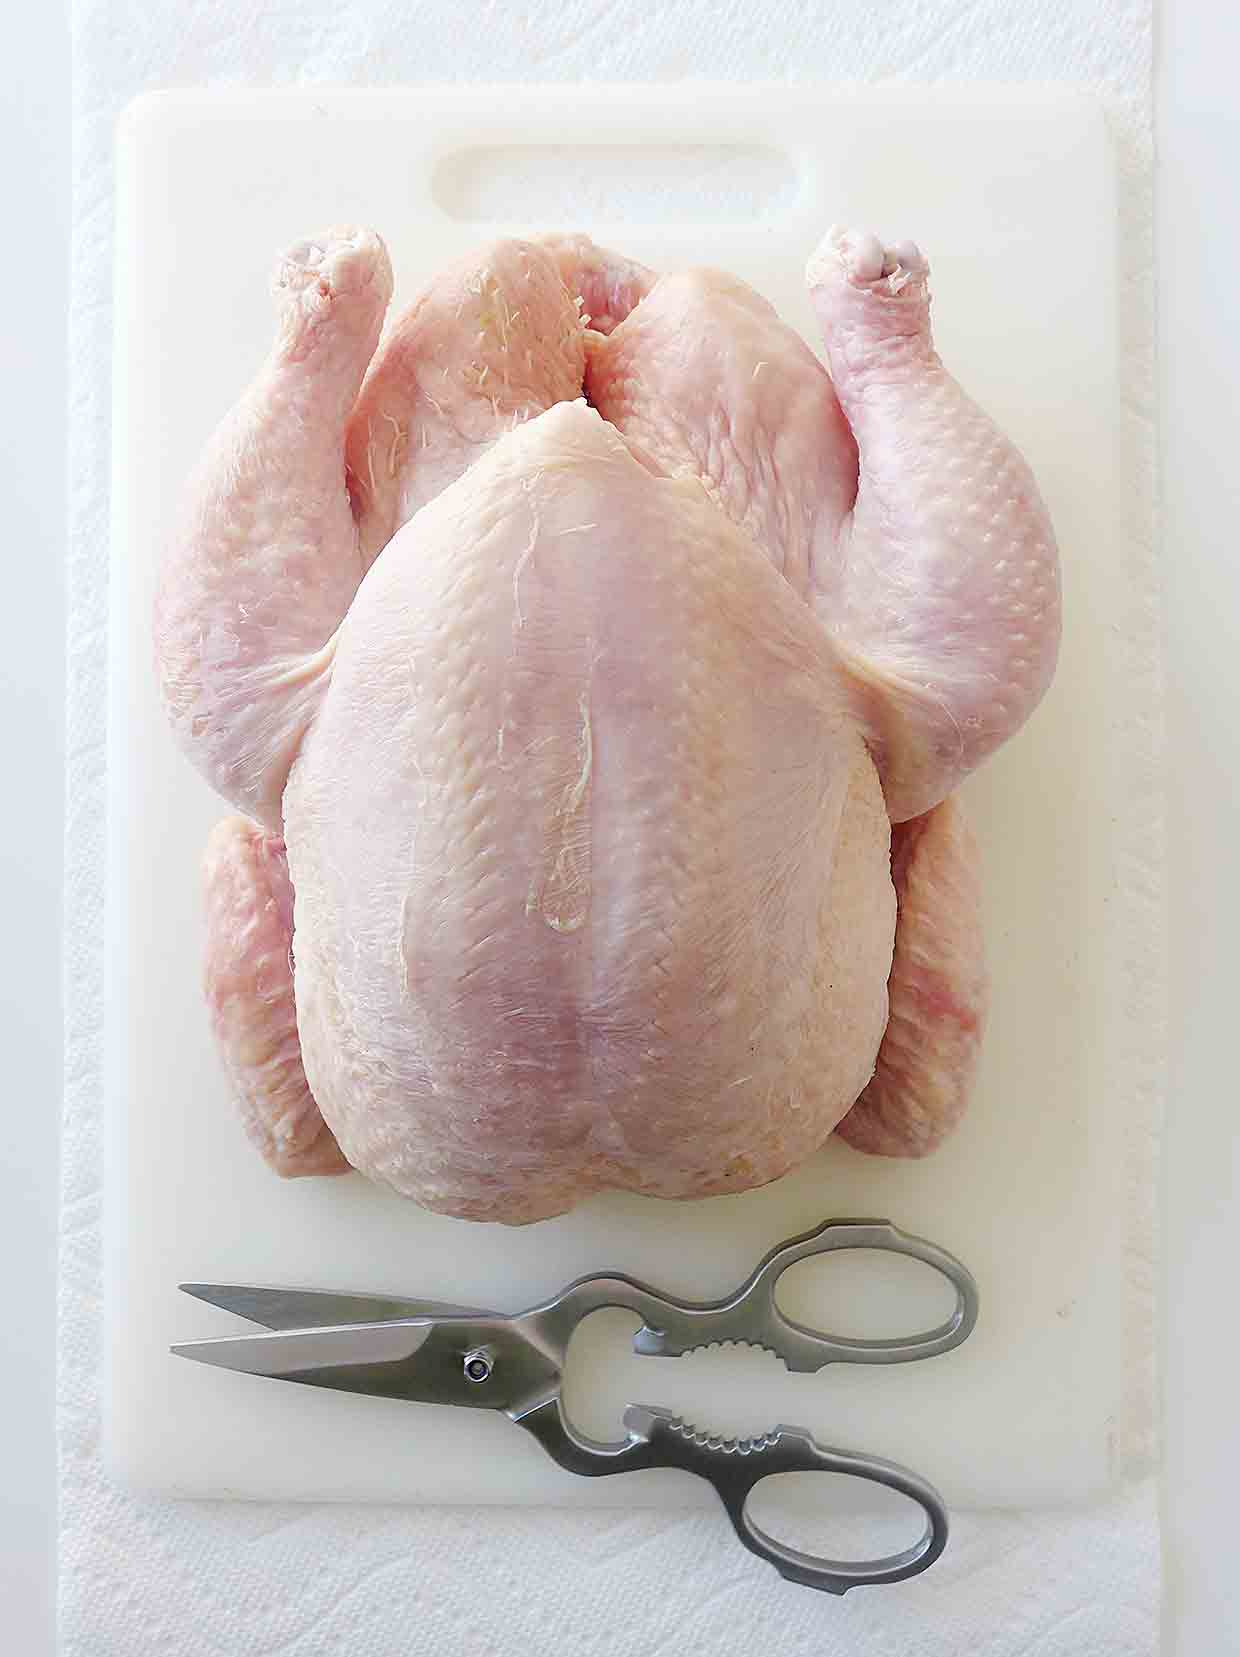 A whole chicken on a cutting board with a pair of kitchen shears beside it.